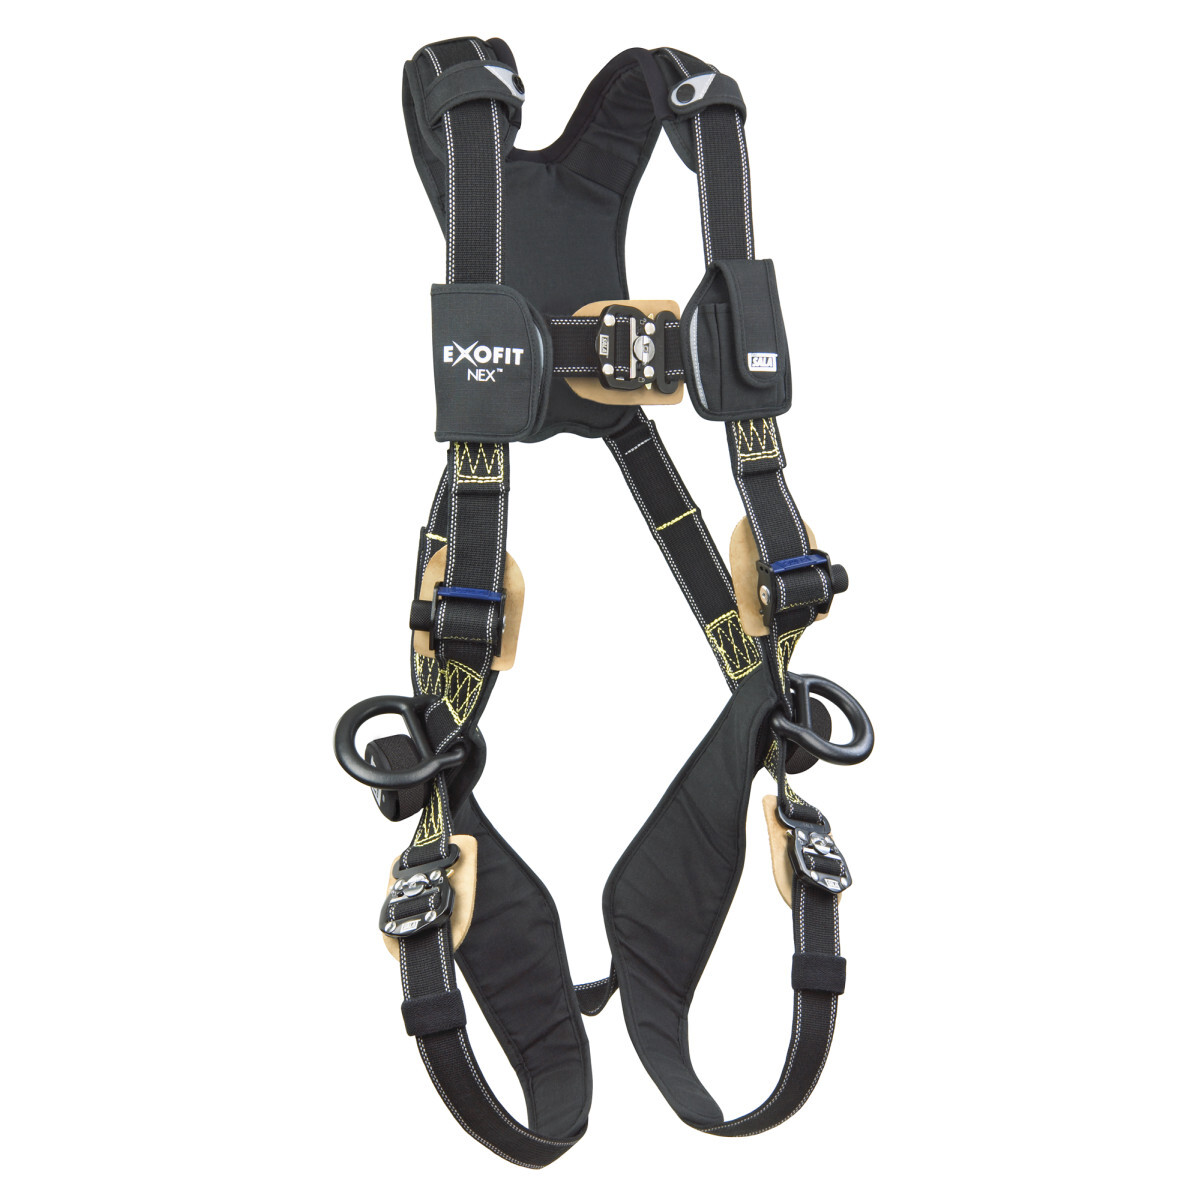 3M™ DBI-SALA® X-Large ExoFit NEX™ Arc Flash Full Body/Vest Style Harness With Back And Side D-Ring, Quick Connect Chest And Leg